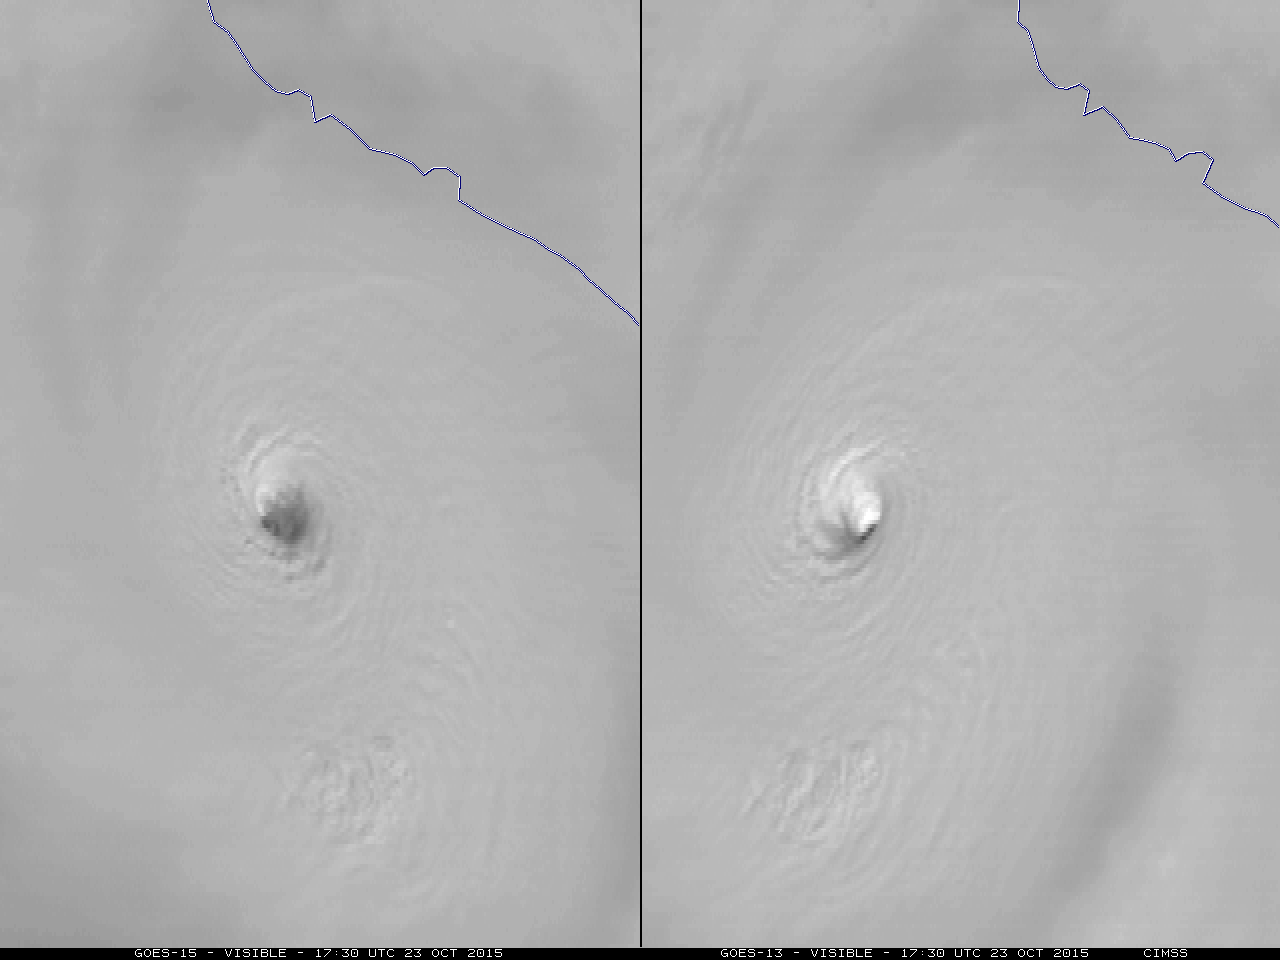 GOES-15 (left) and GOES-13 (right) 0.63 µm visible images [click to play animation]